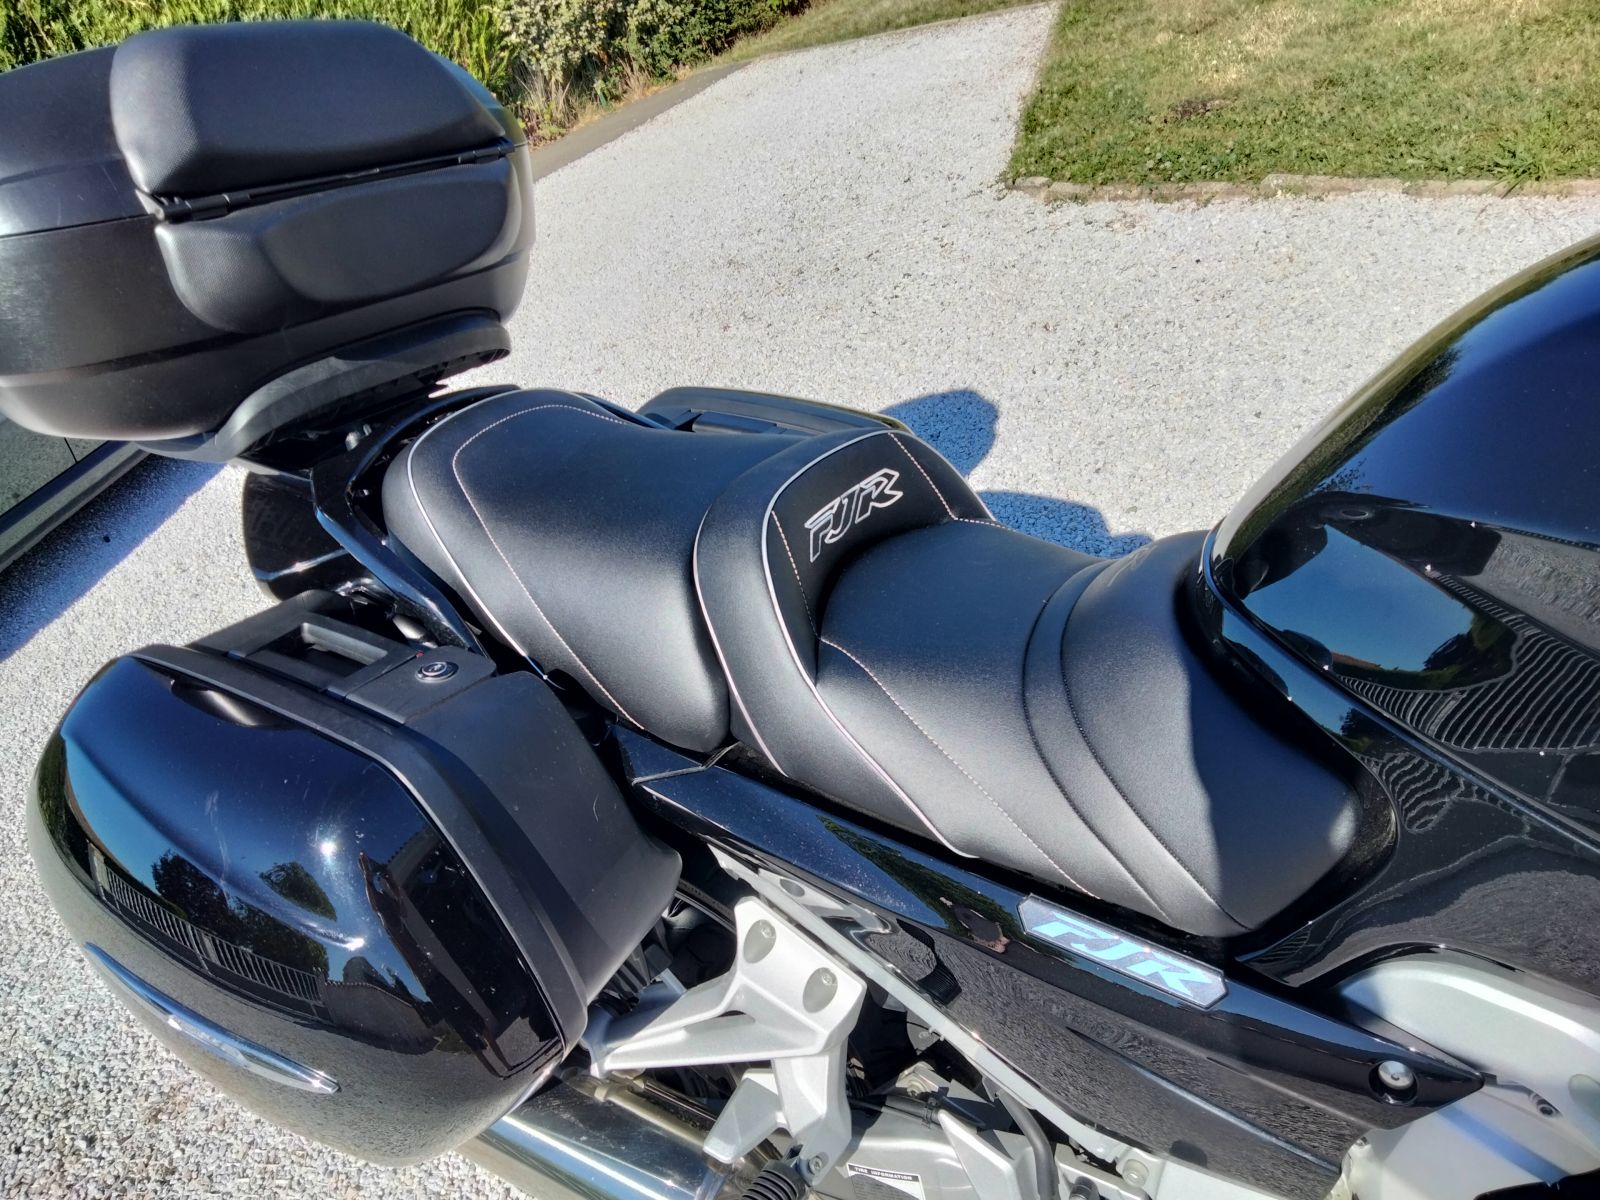 Top Sellerie France Deluxe Comfort Seat Raised Height For Yamaha FJR 1300 2006-2013#1177 